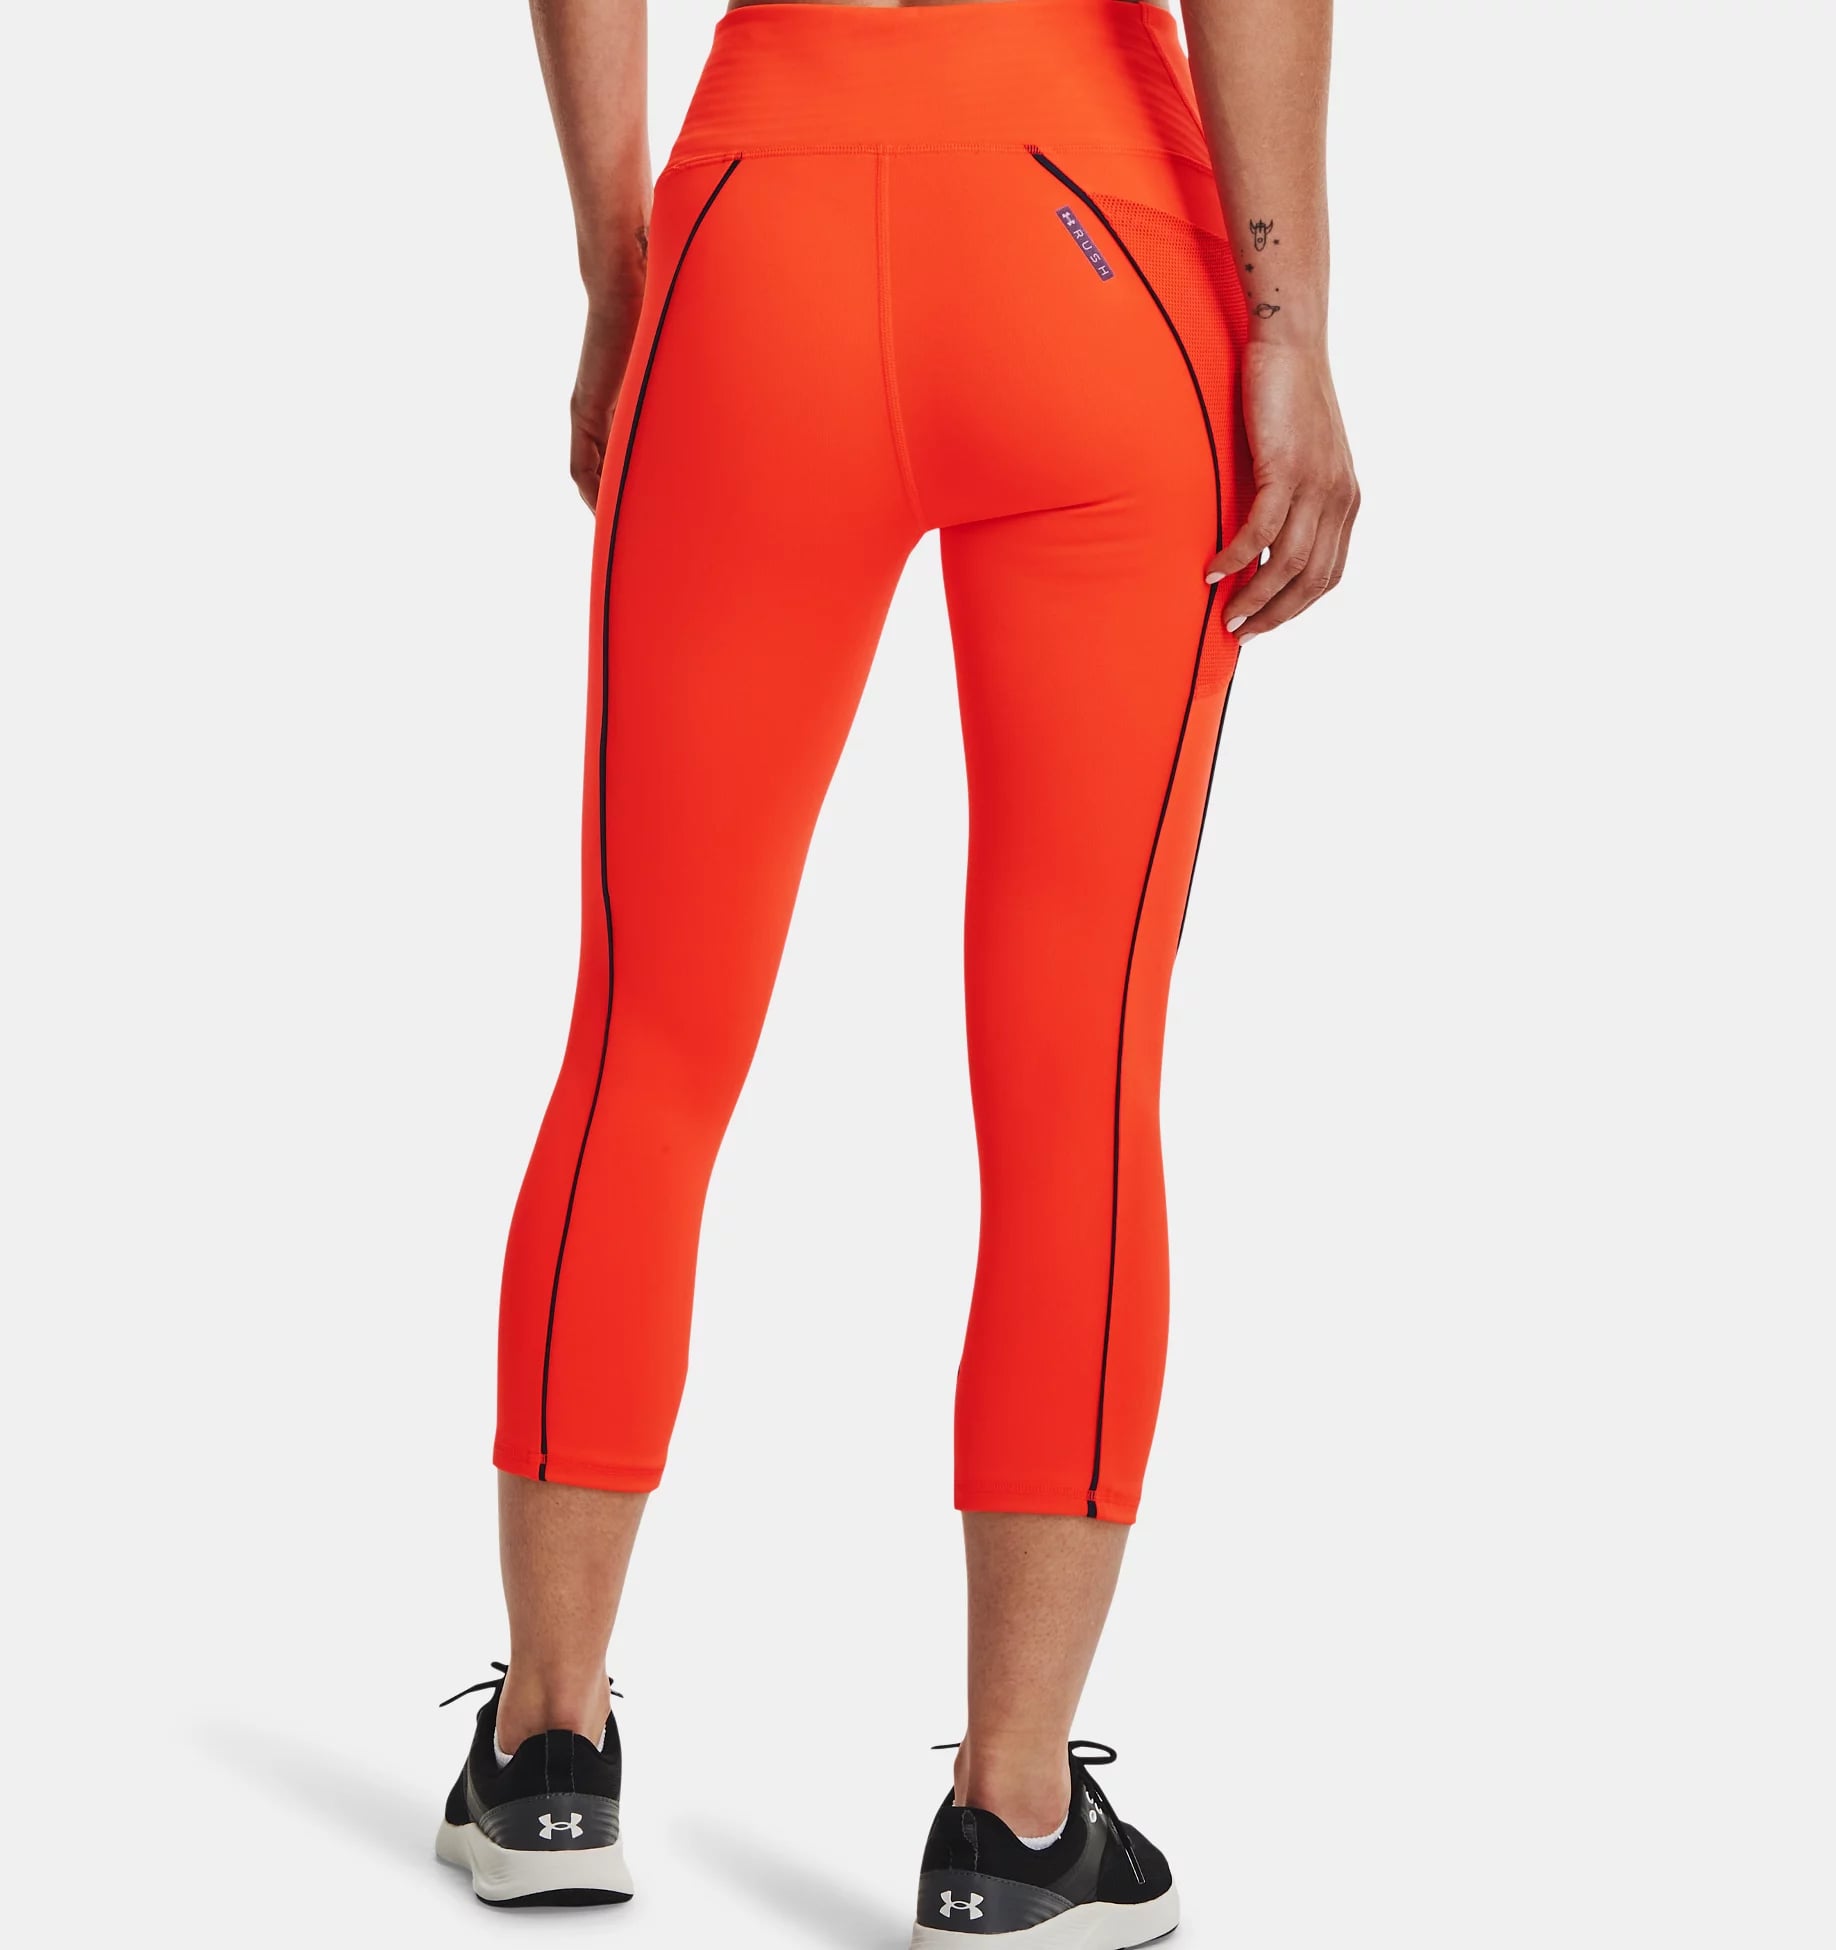 Utes Under Armour Leggings with Pockets